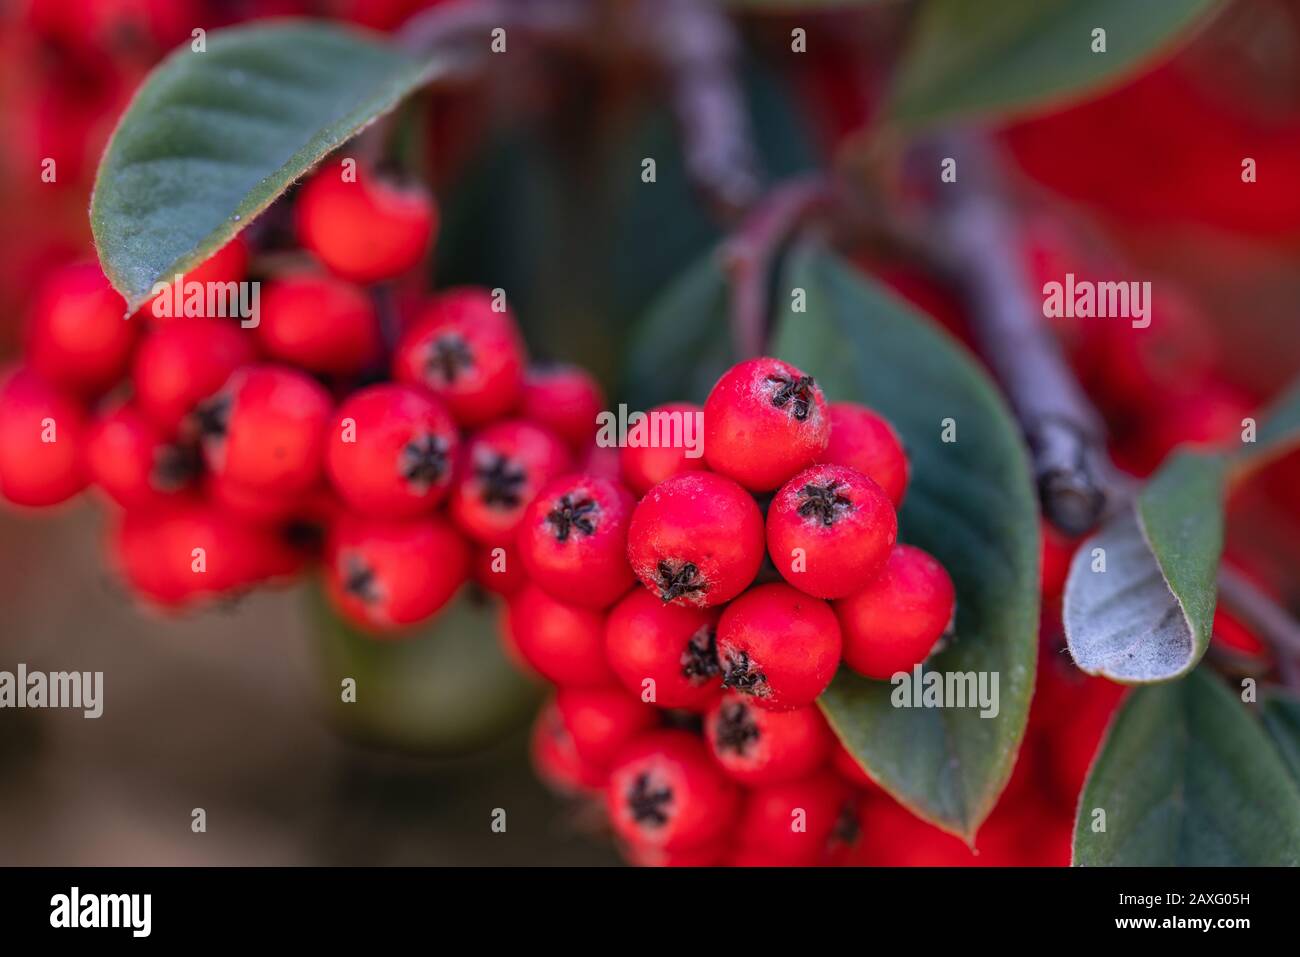 Cotoneaster plant with ripe red berries close up Stock Photo